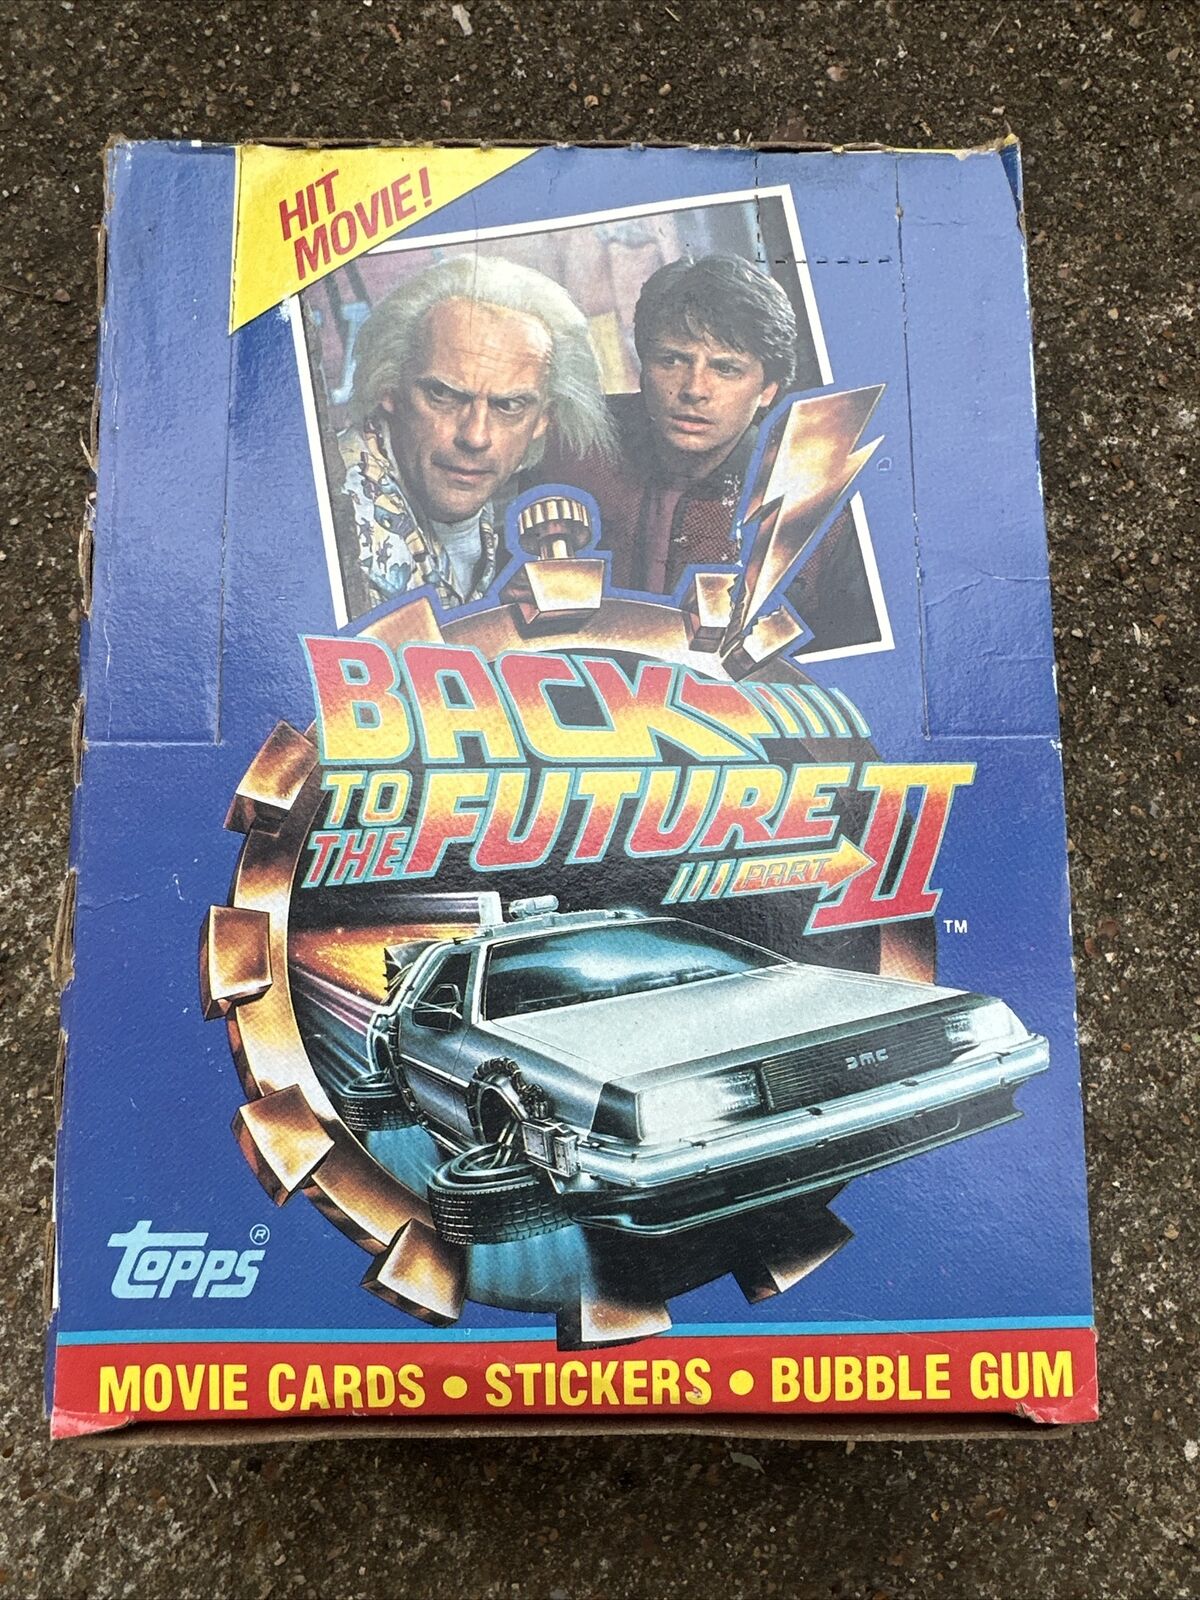 BACK TO THE FUTURE 2 Topps 1989 Trading Cards Full Box 36 Sealed Packs